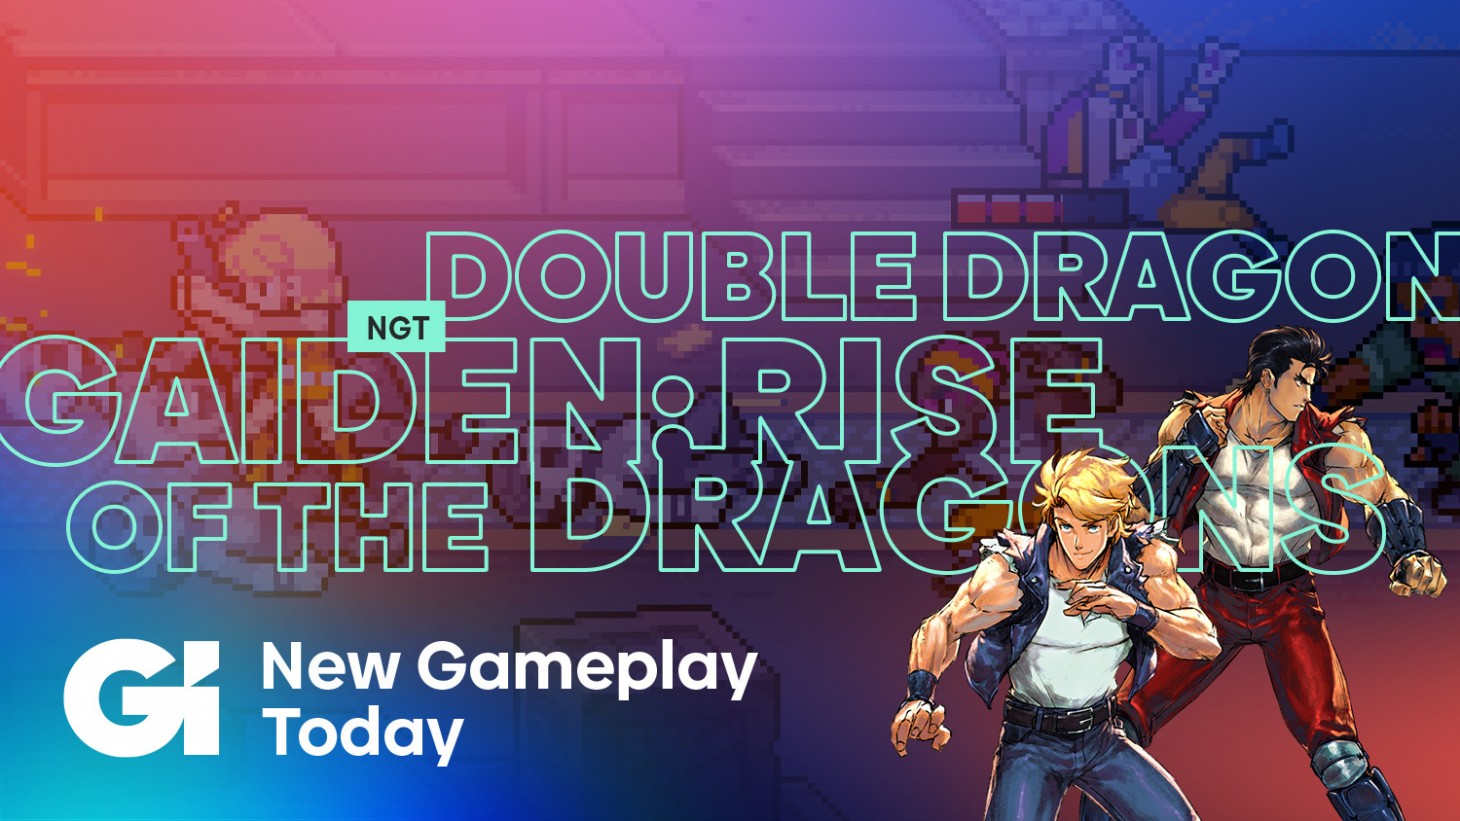 Double Dragon Gaiden: Rise of the Dragons – The Final Preview